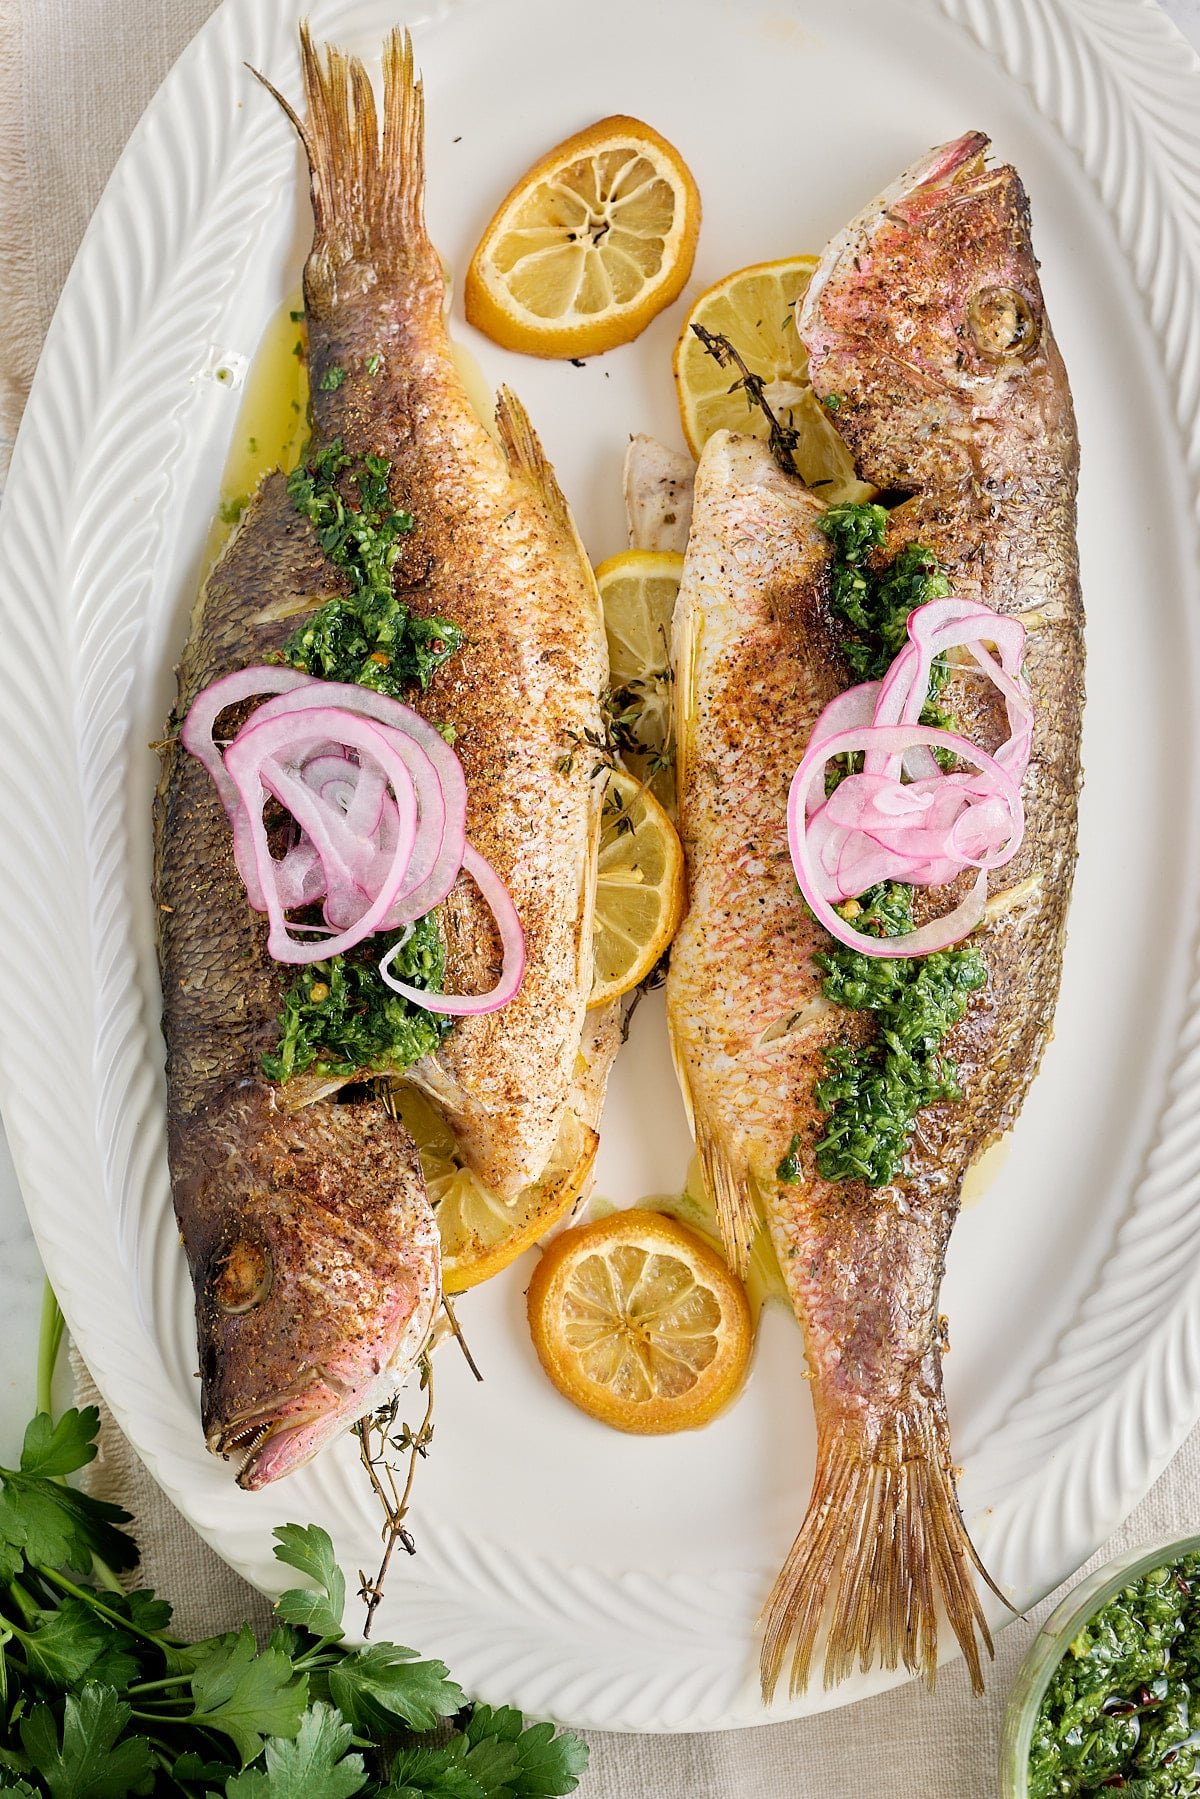 white serving platter with 2 cooked whole fish stuffed with fresh thyme and lemon slices and garnished with red onion and a drizzle of olive oil